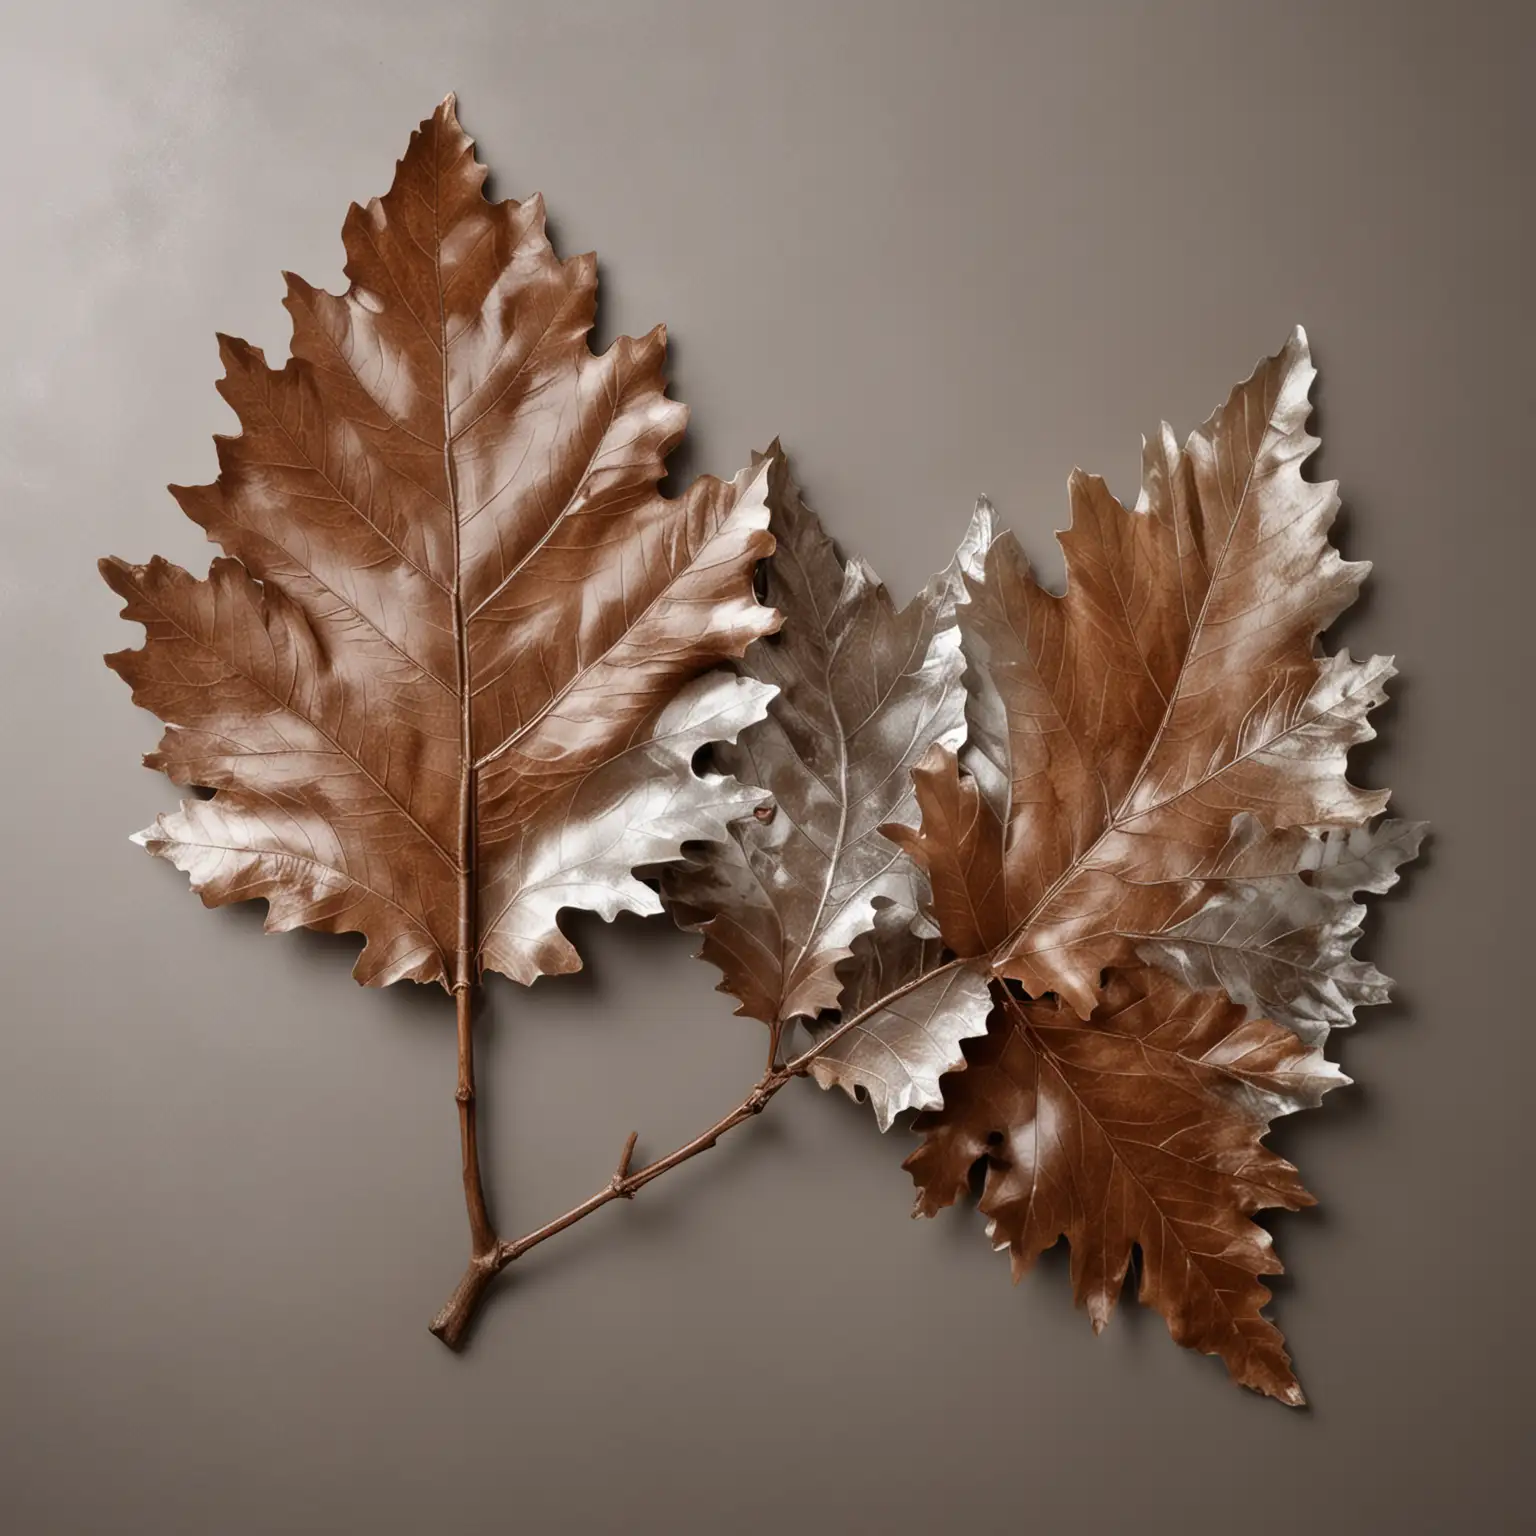 Three Large Oak Leaves on a Branch Against a Warm Chocolate and Bright Silver Background